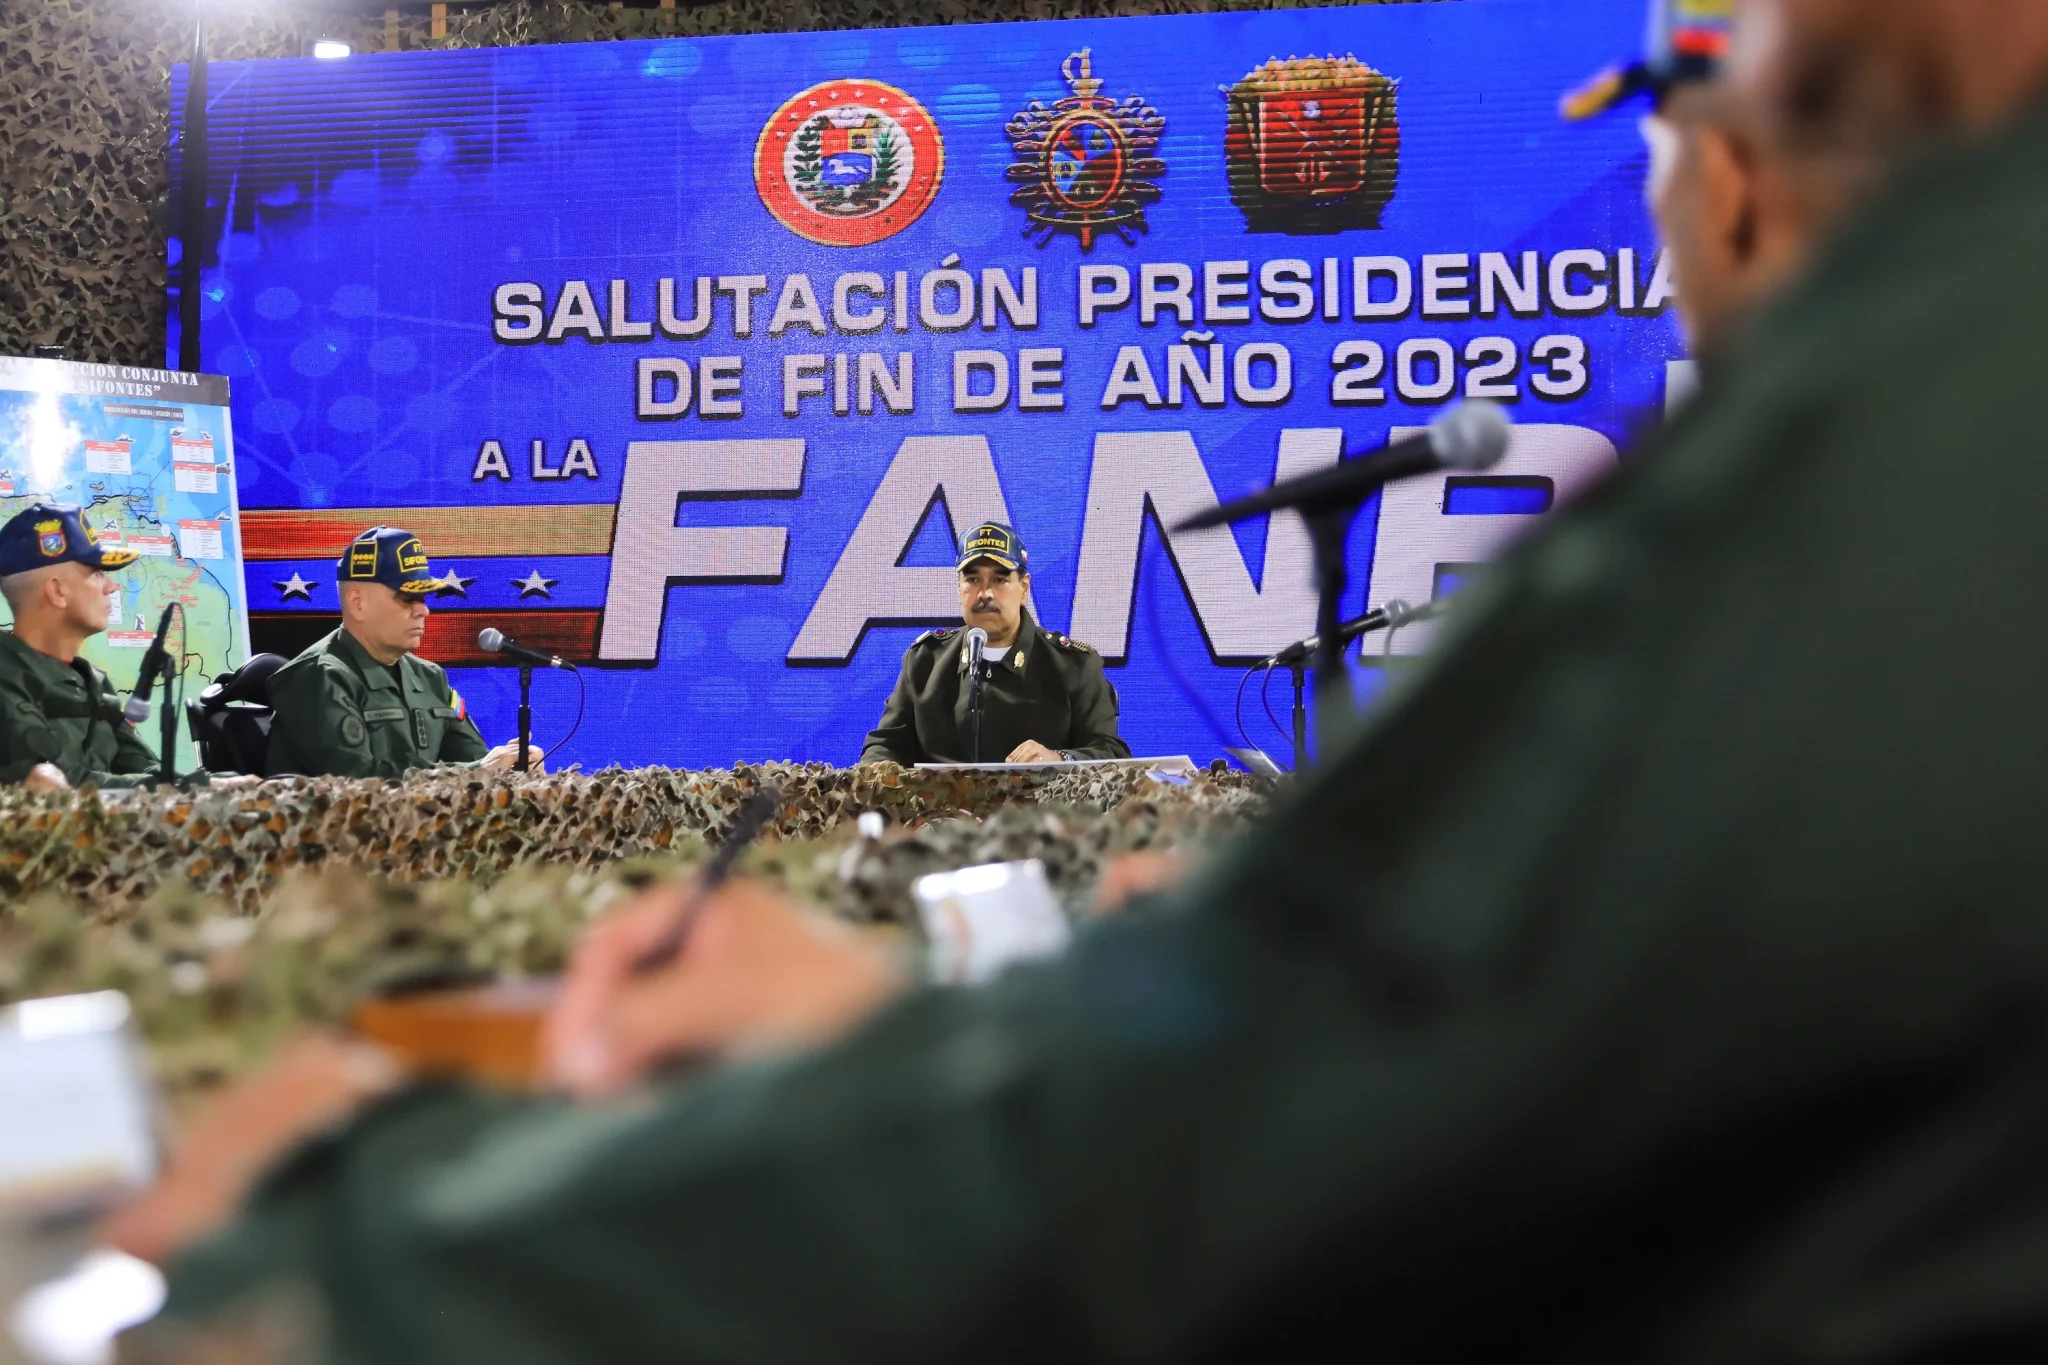 The president of Venezuela, Nicolás Maduro, presenting his end-of-year salutation message to the Bolivarian National Armed Forces, announcing the deployment of a joint military operation to face Guyanese and UK provocation, on Thursday, December 28, 2023. Photo: Presidential Press.